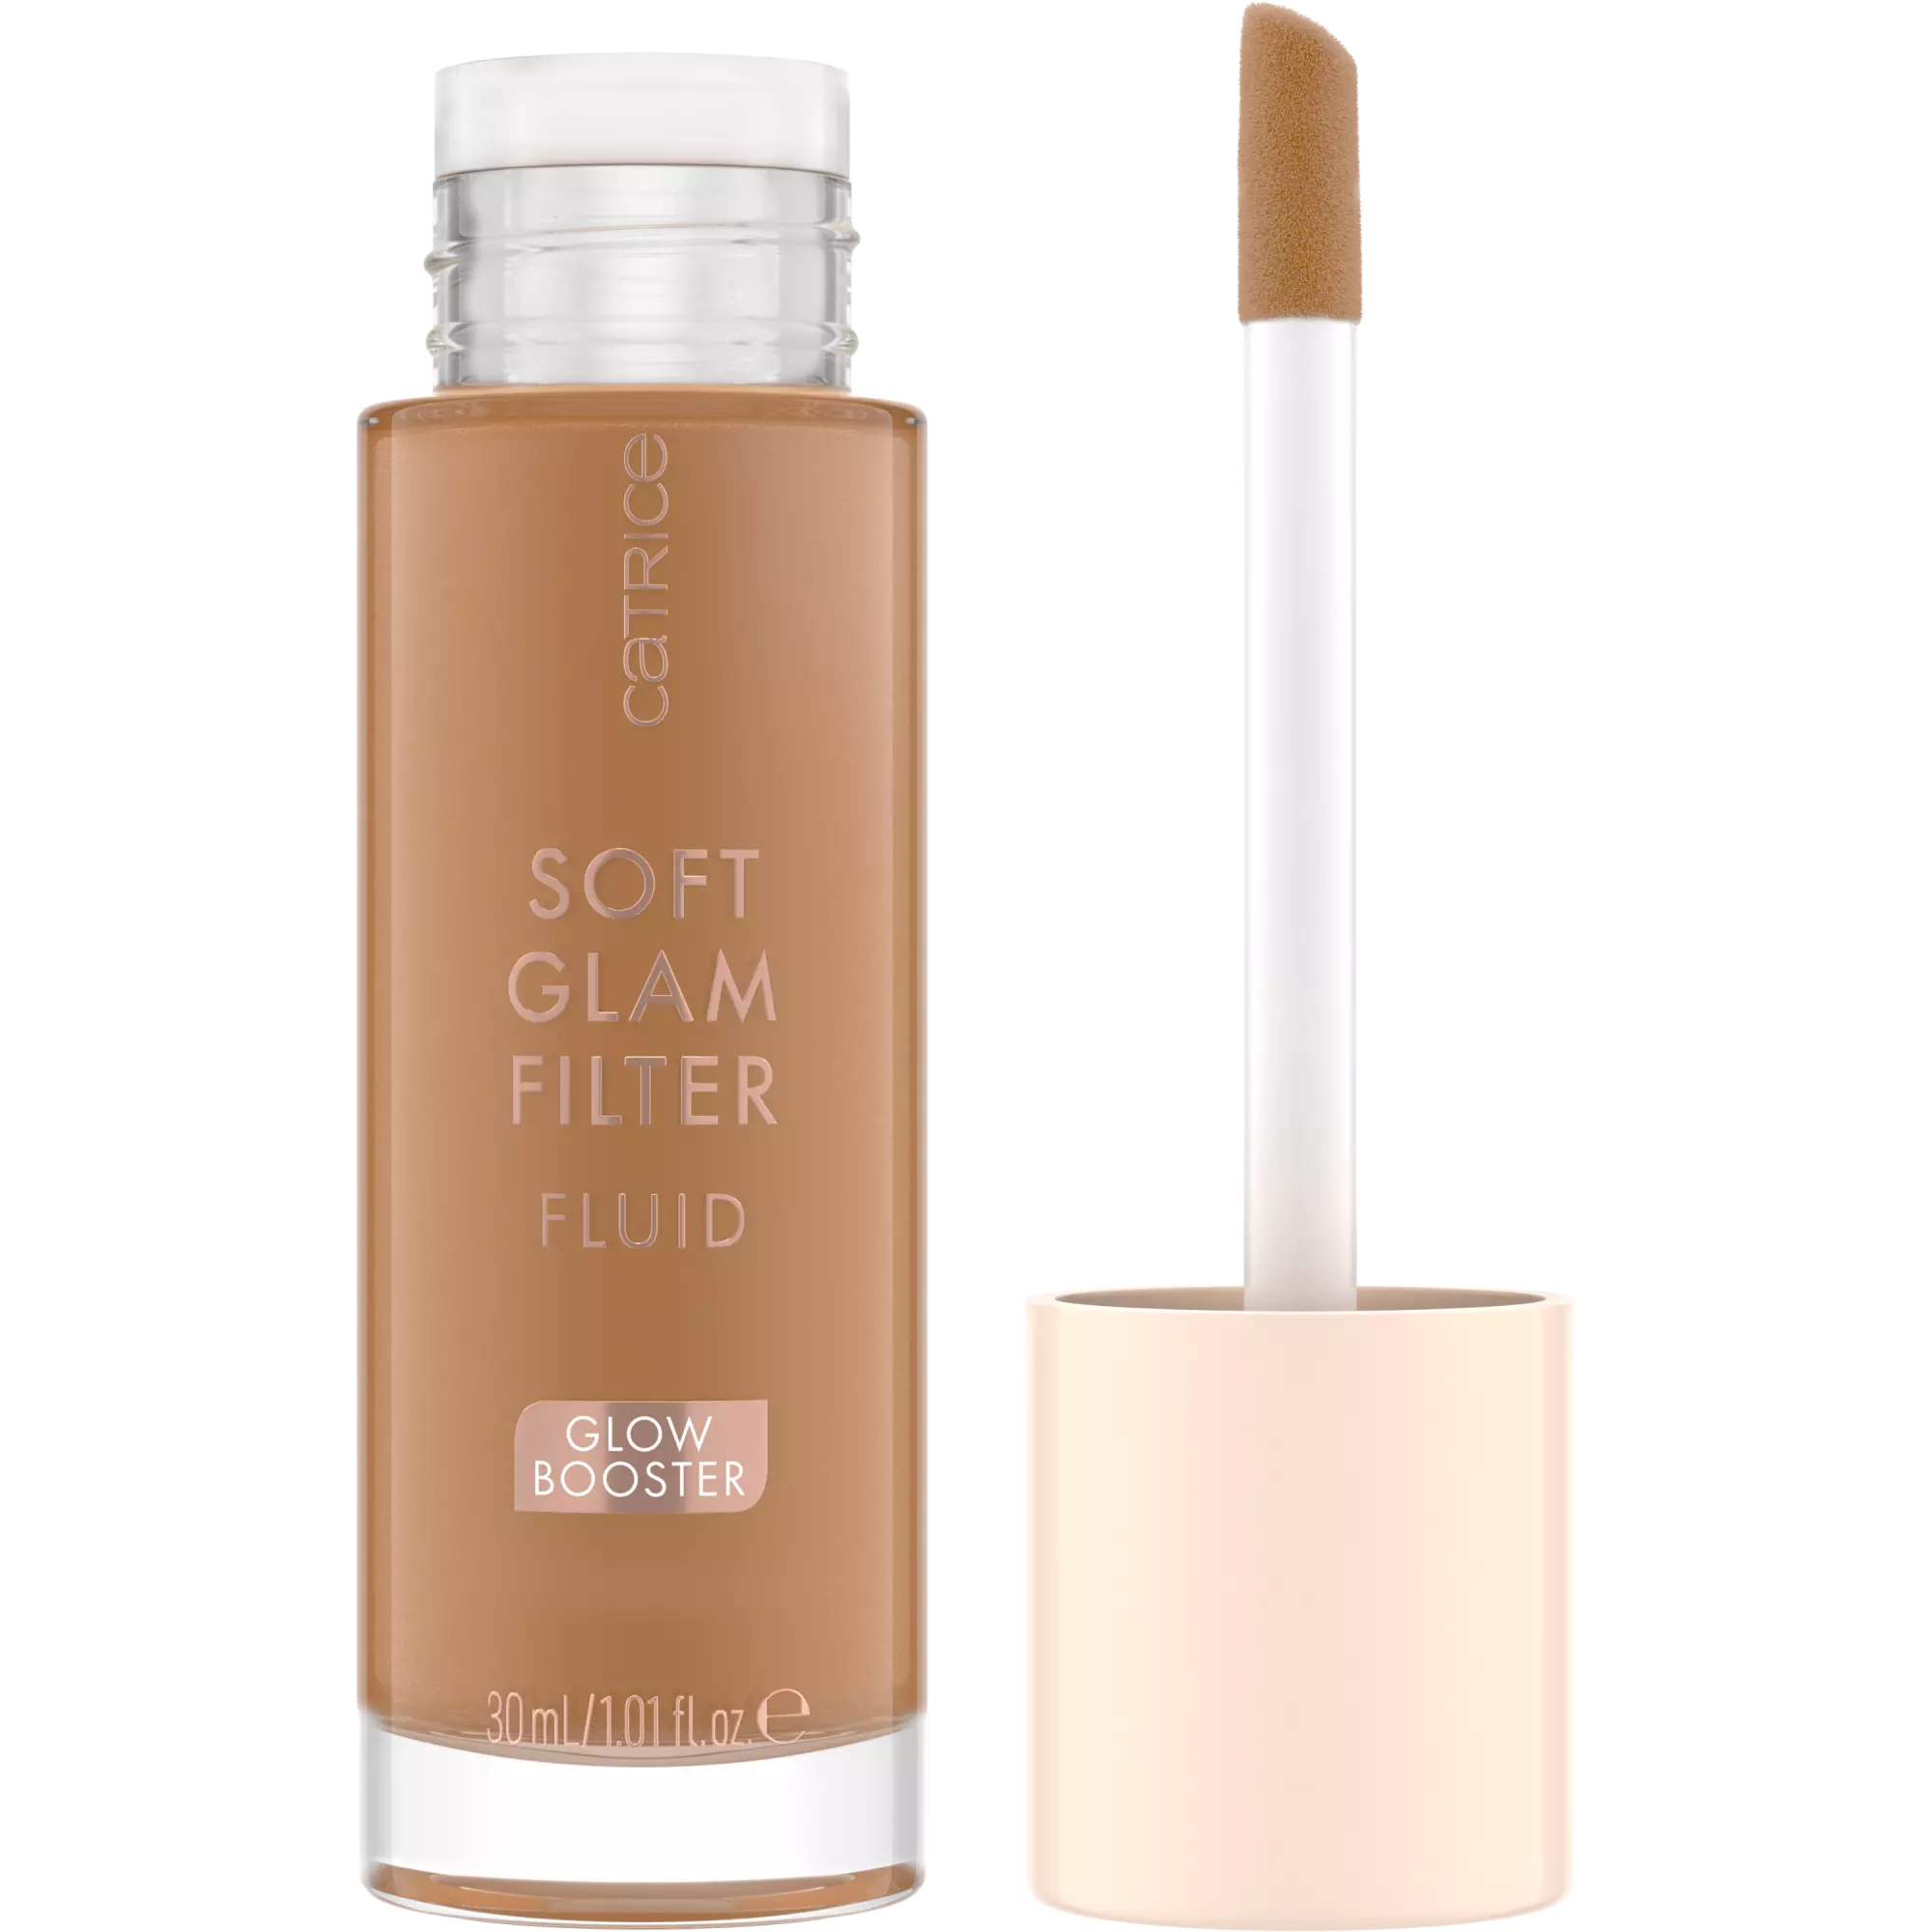 CATRICE Soft Glam Filter Fluid